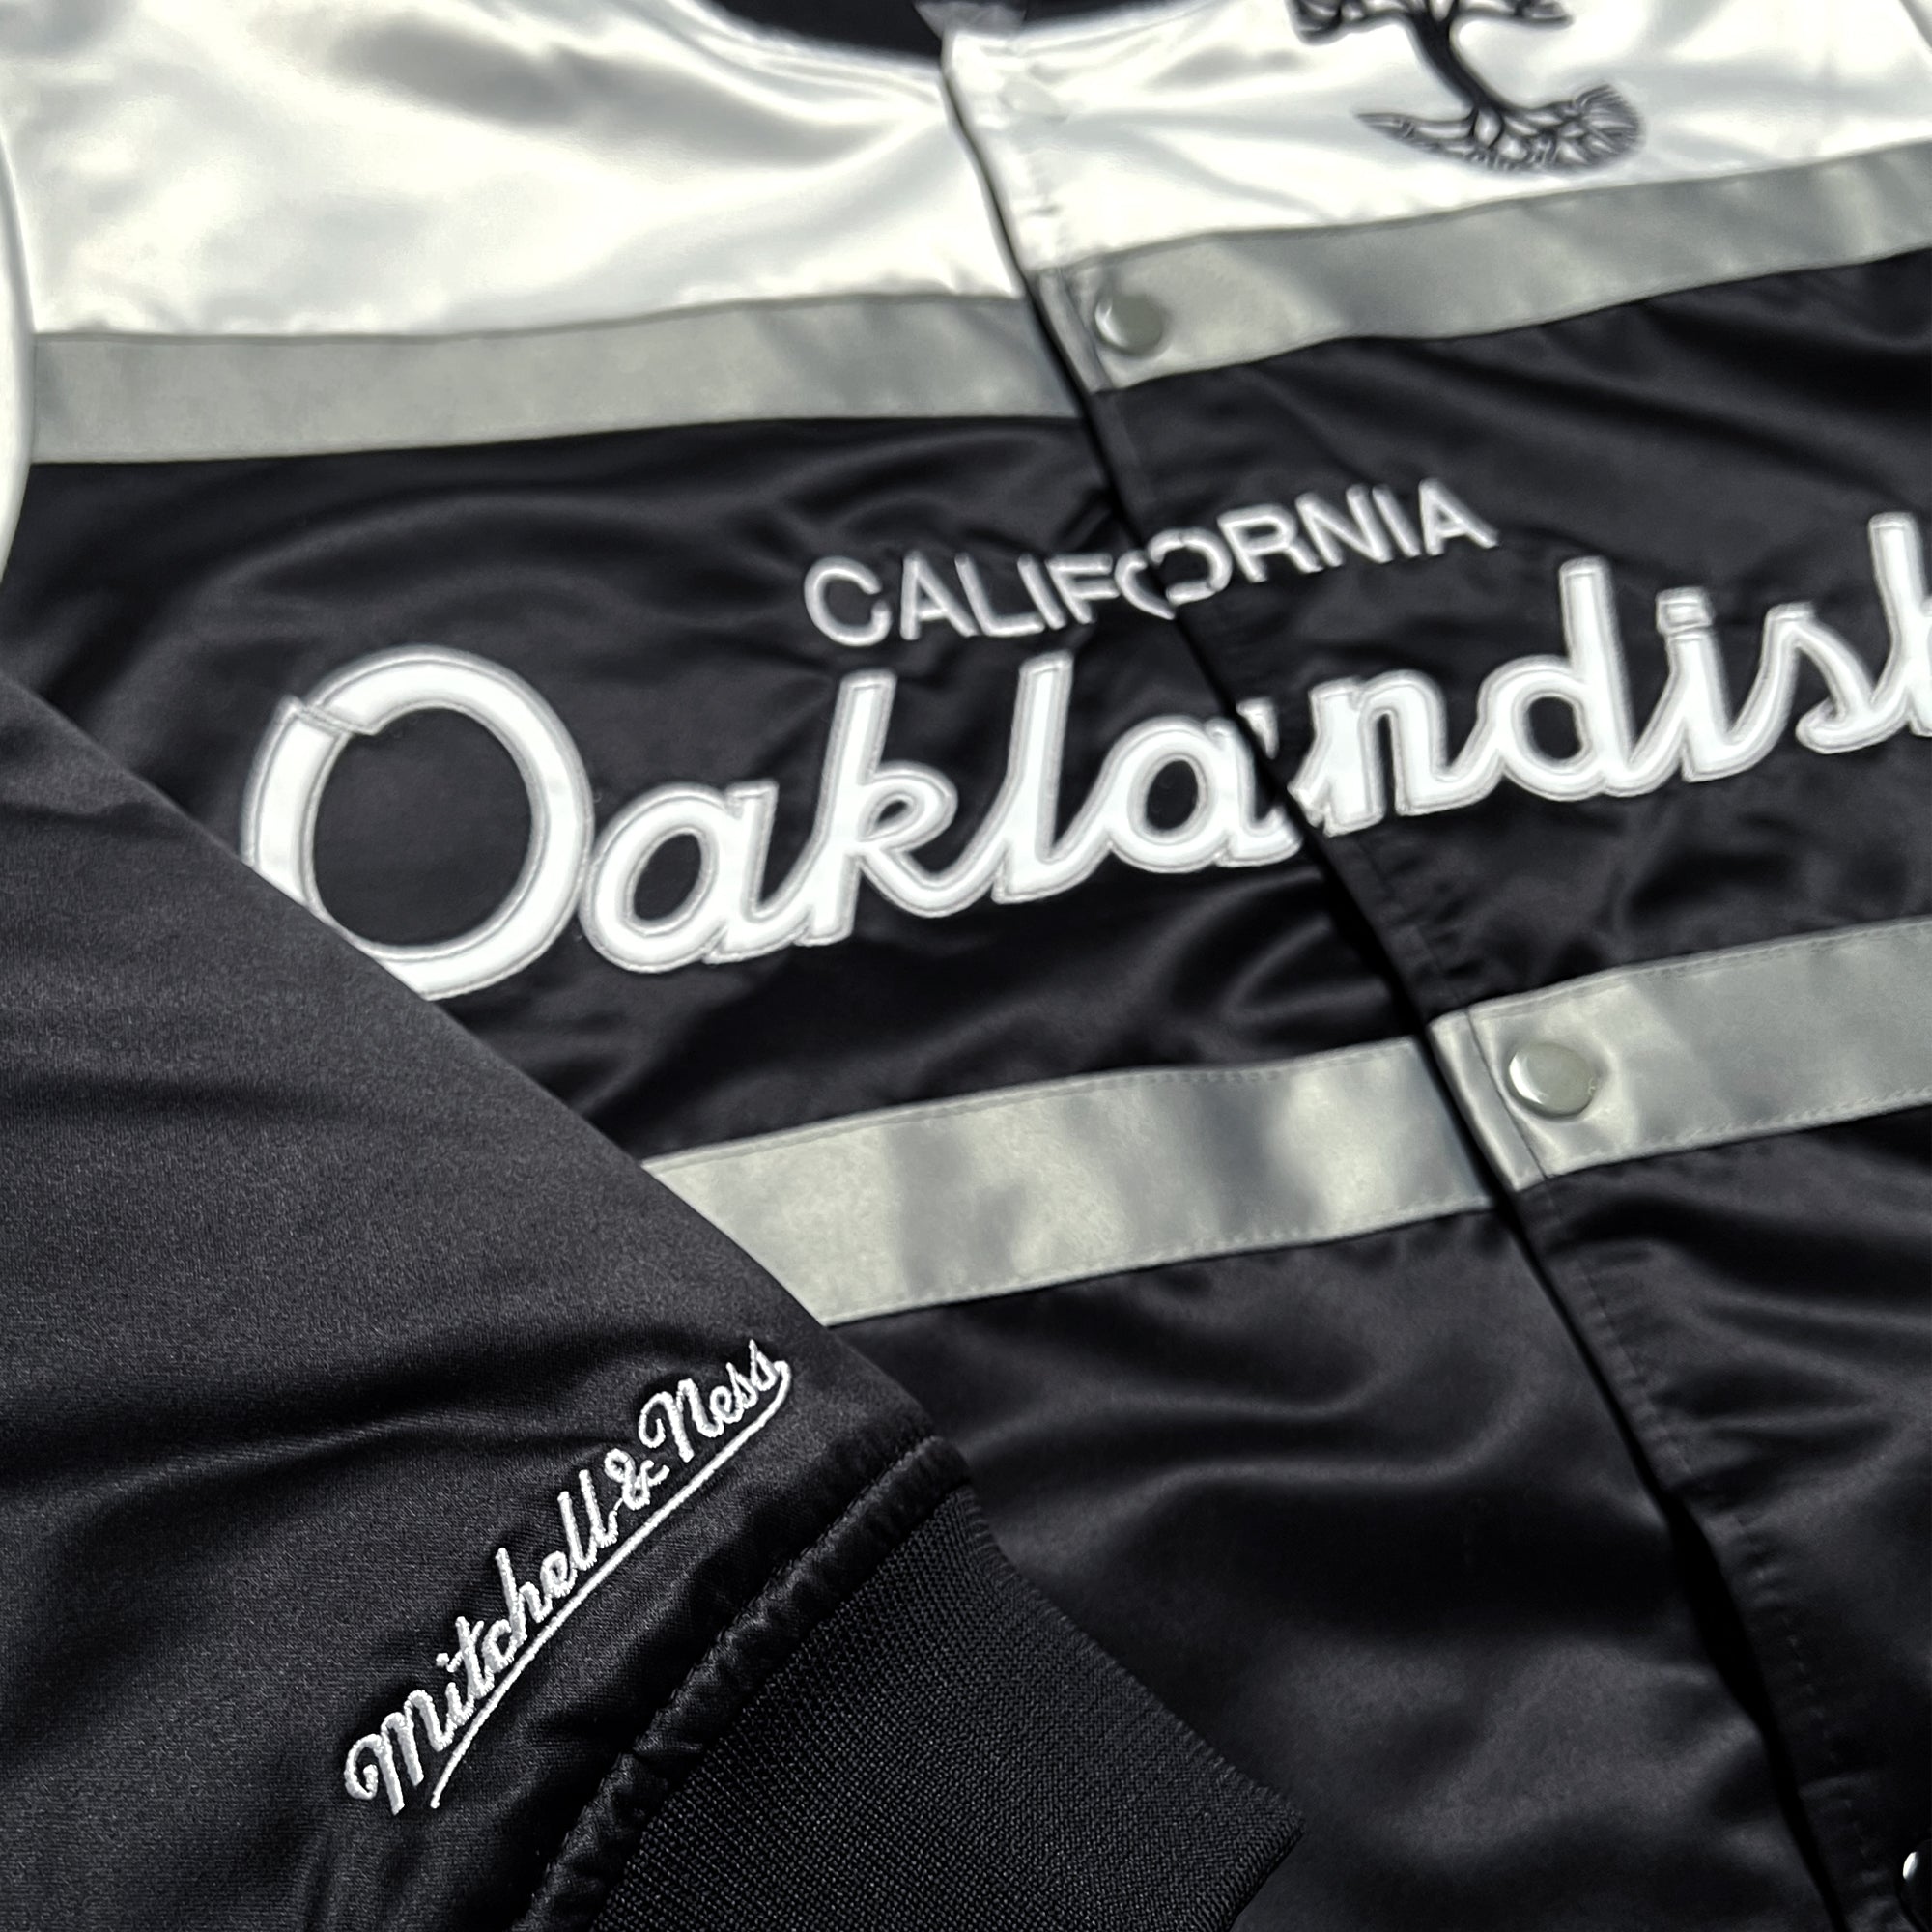 Close-up of Mitchell & Ness wordmark on the sleeve and California Oaklandish wordmark on the chest of a striped satin jacket.